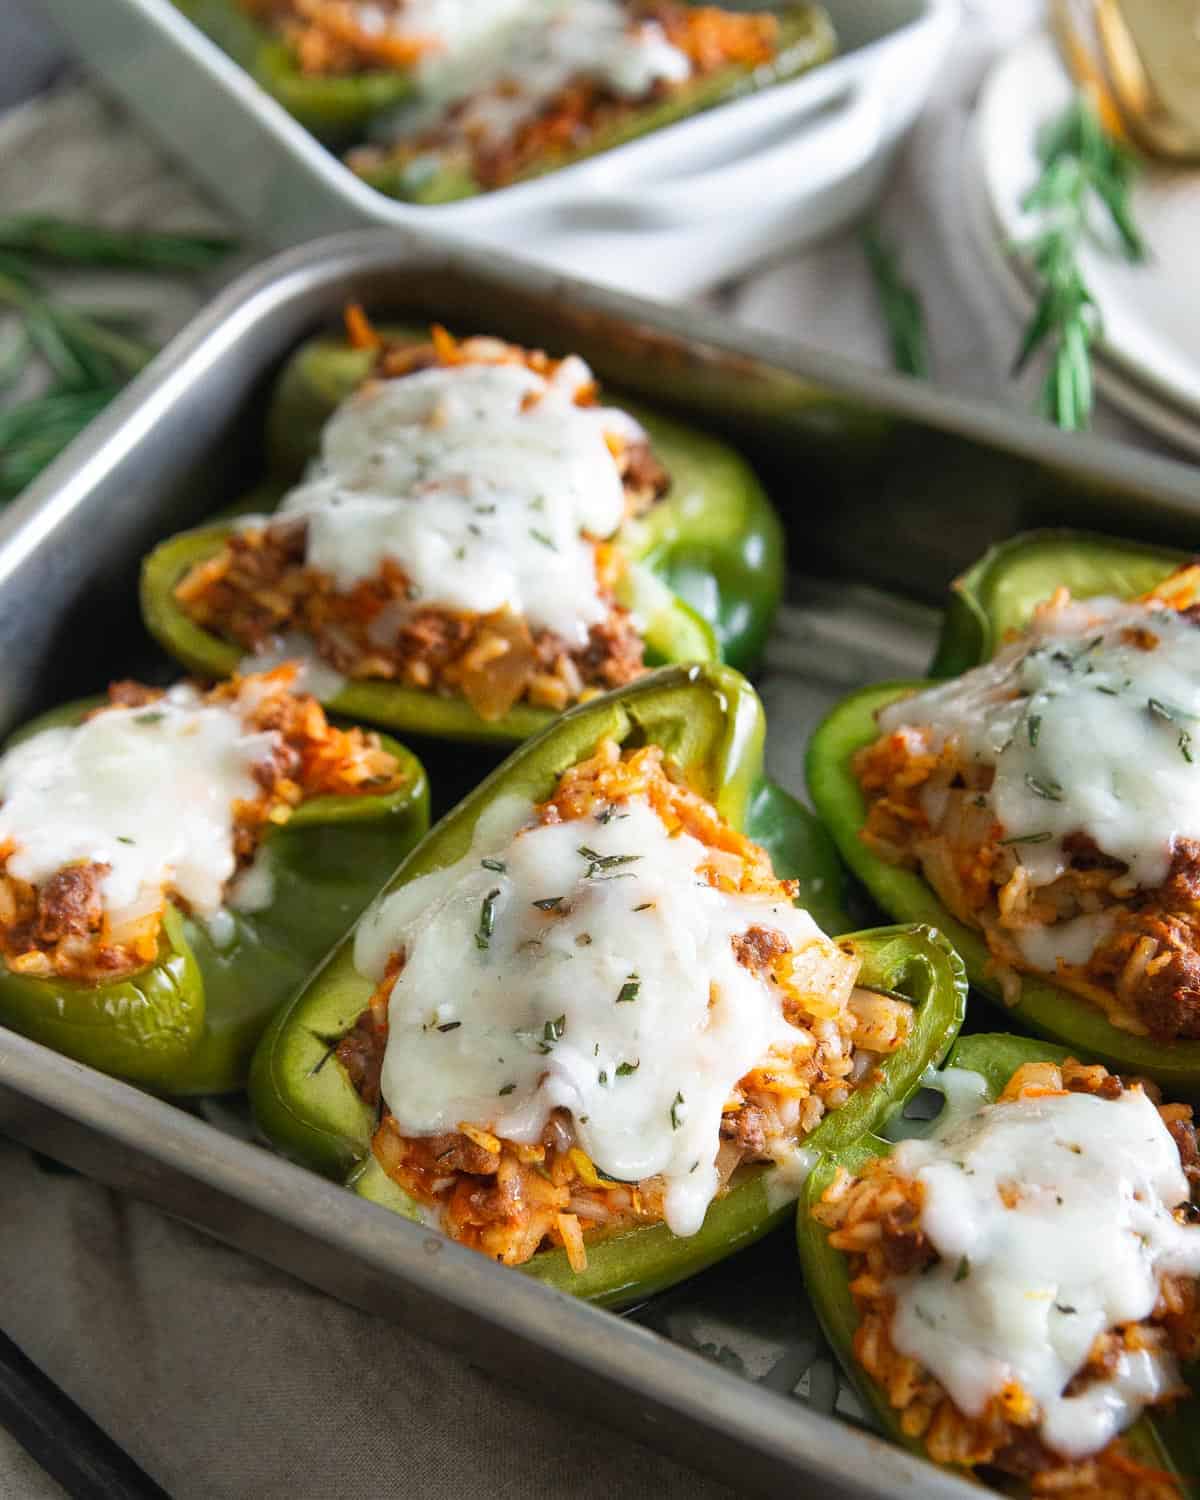 Lean protein packed ground bison stuffed peppers are filled with rice, shredded zucchini, carrot, onion and tomato sauce for a deliciously hearty meal with a melted cheesy topping.